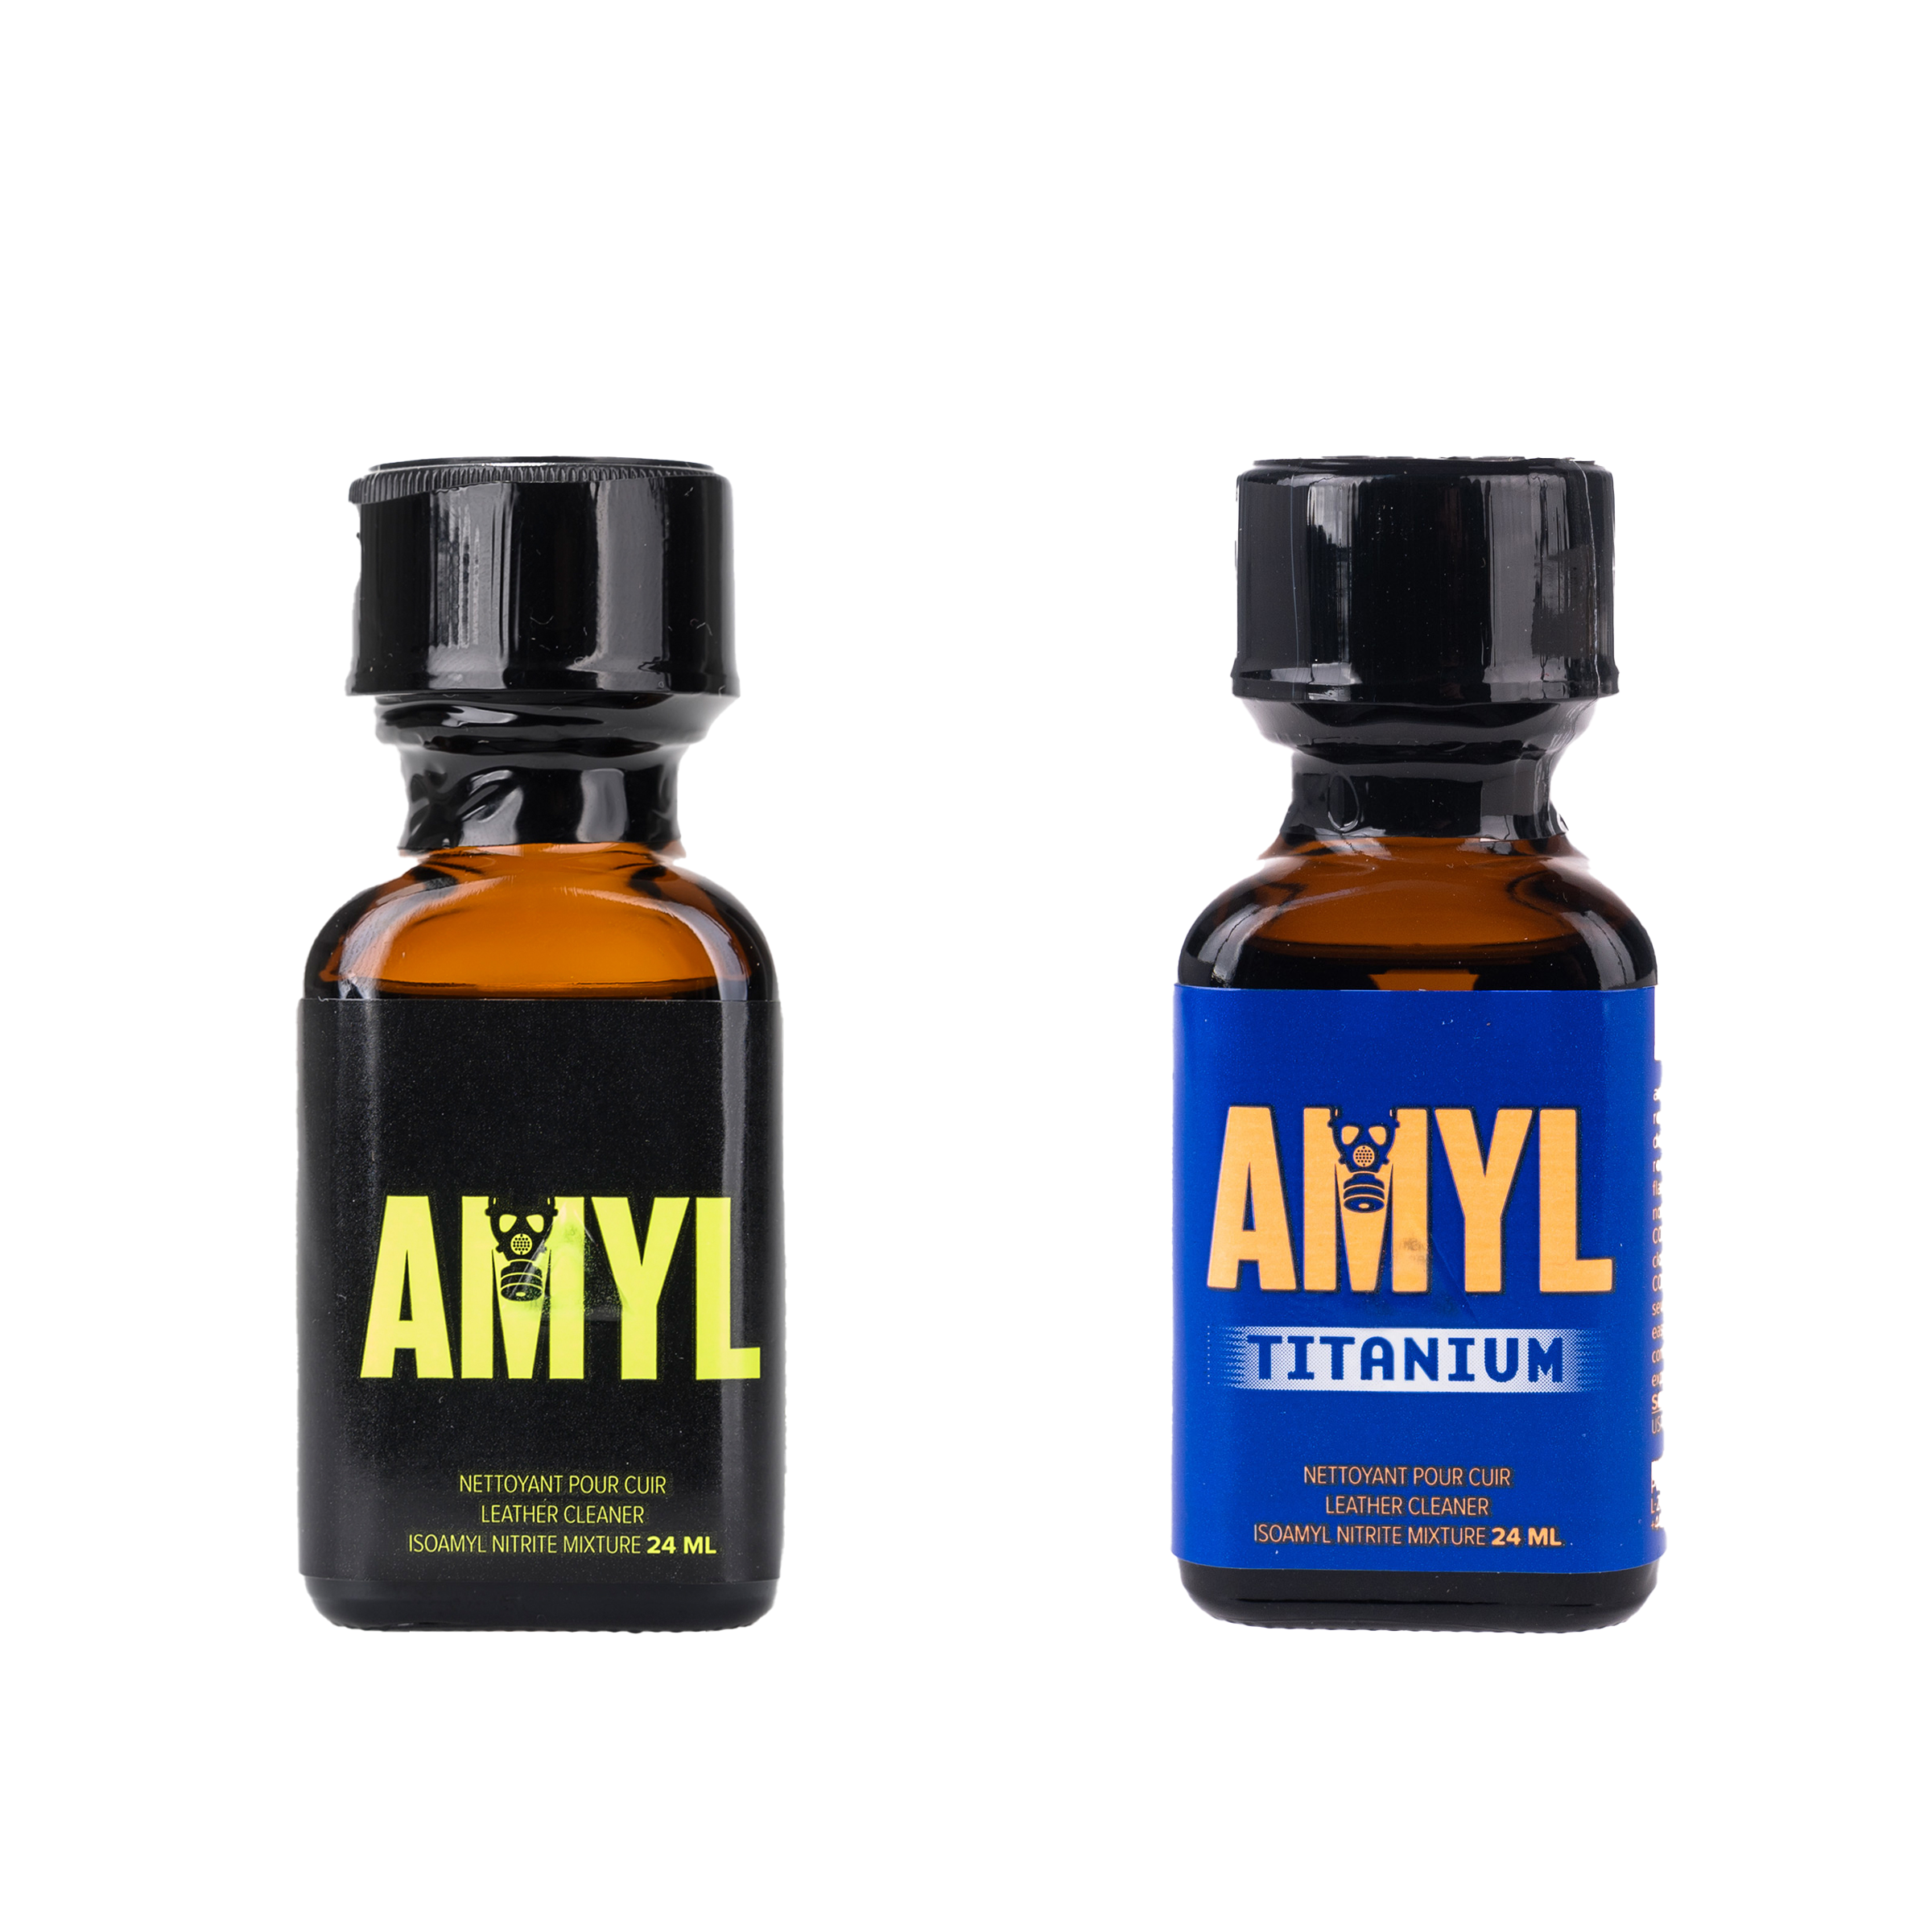 Amyl Double Pack, POPPERS UK, POPPERS USA, FREE DELIVERY, NEXT DAY DELIVERY